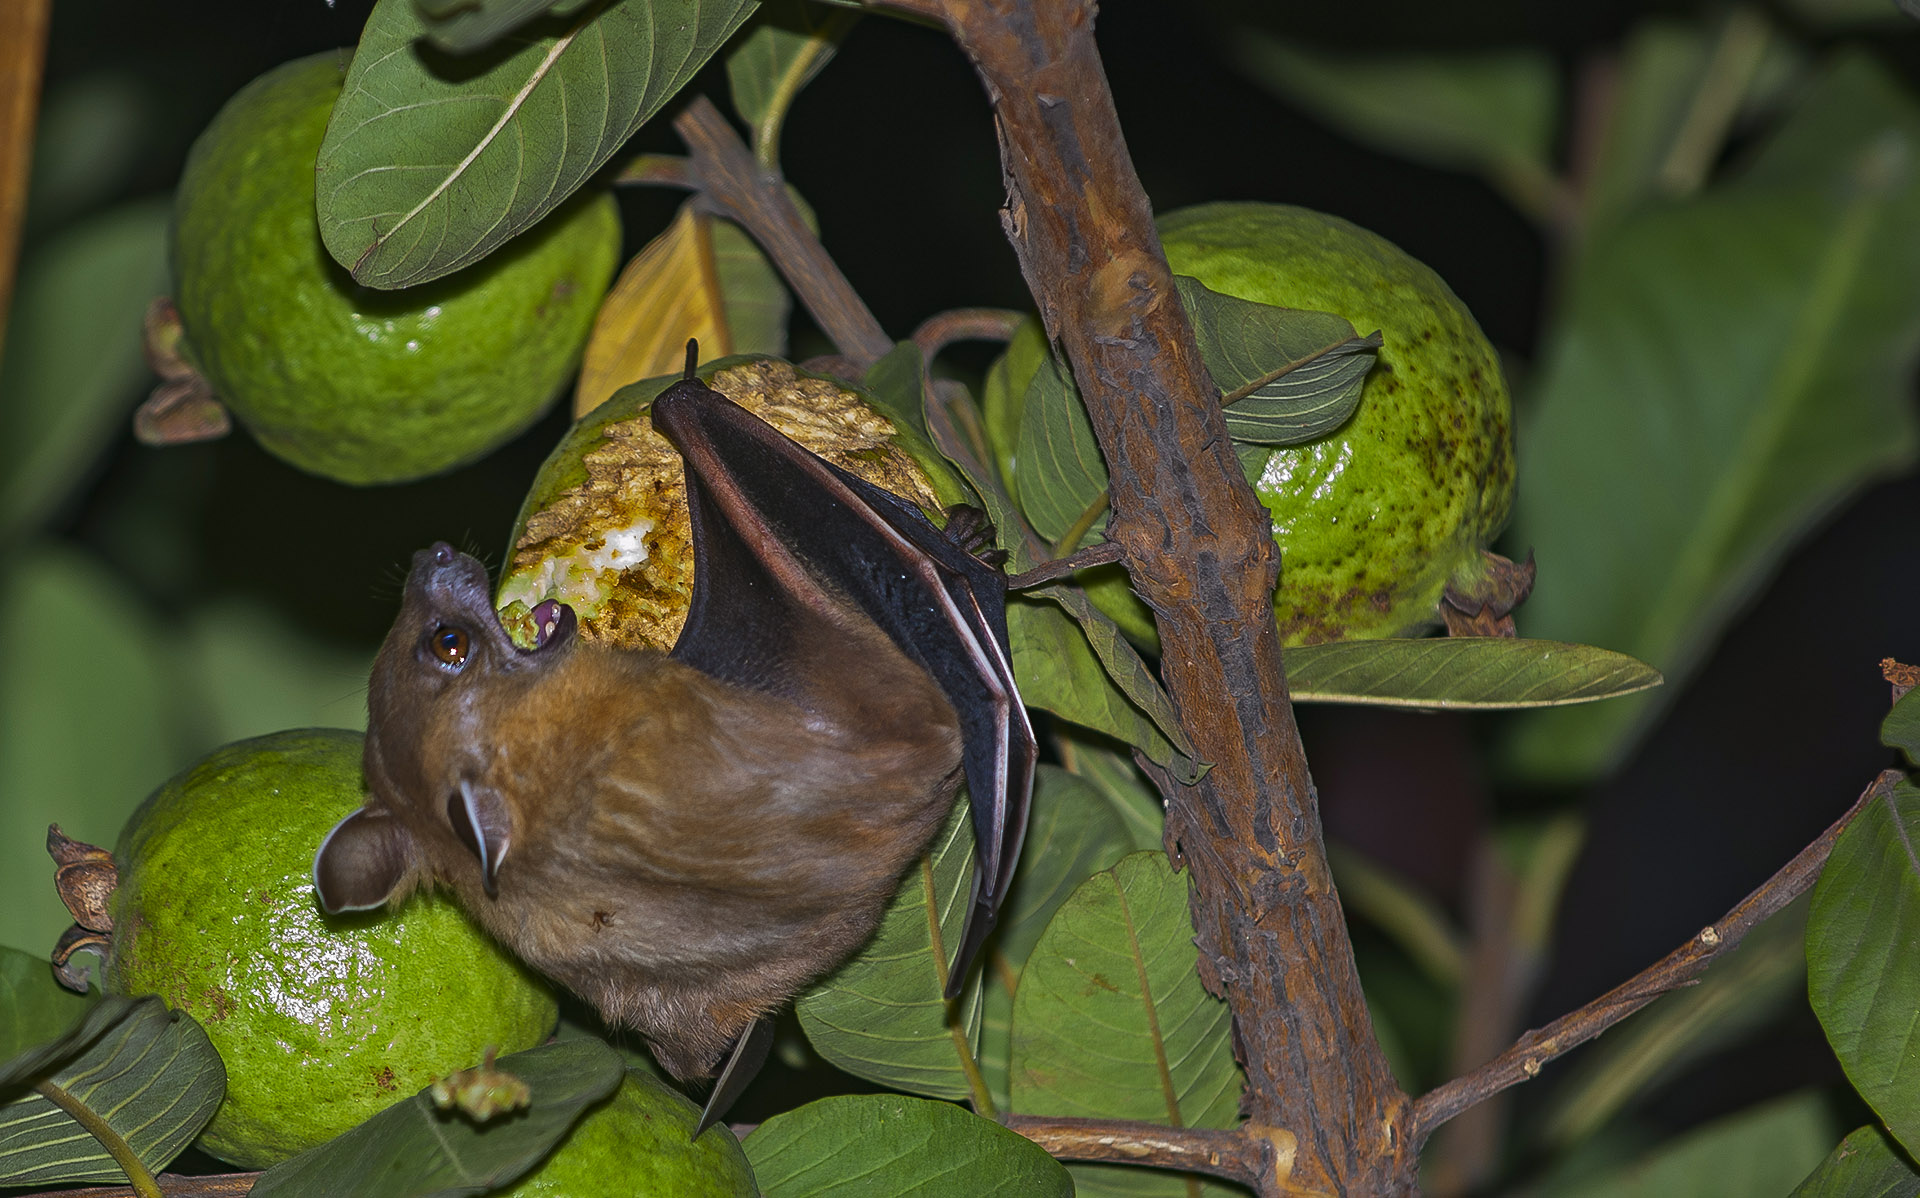 Fruit bats do not rely on echolocation. They have good eyesight and a highly developed sense of smell, both essential for their survival. Photo: Dhritiman Mukherjee